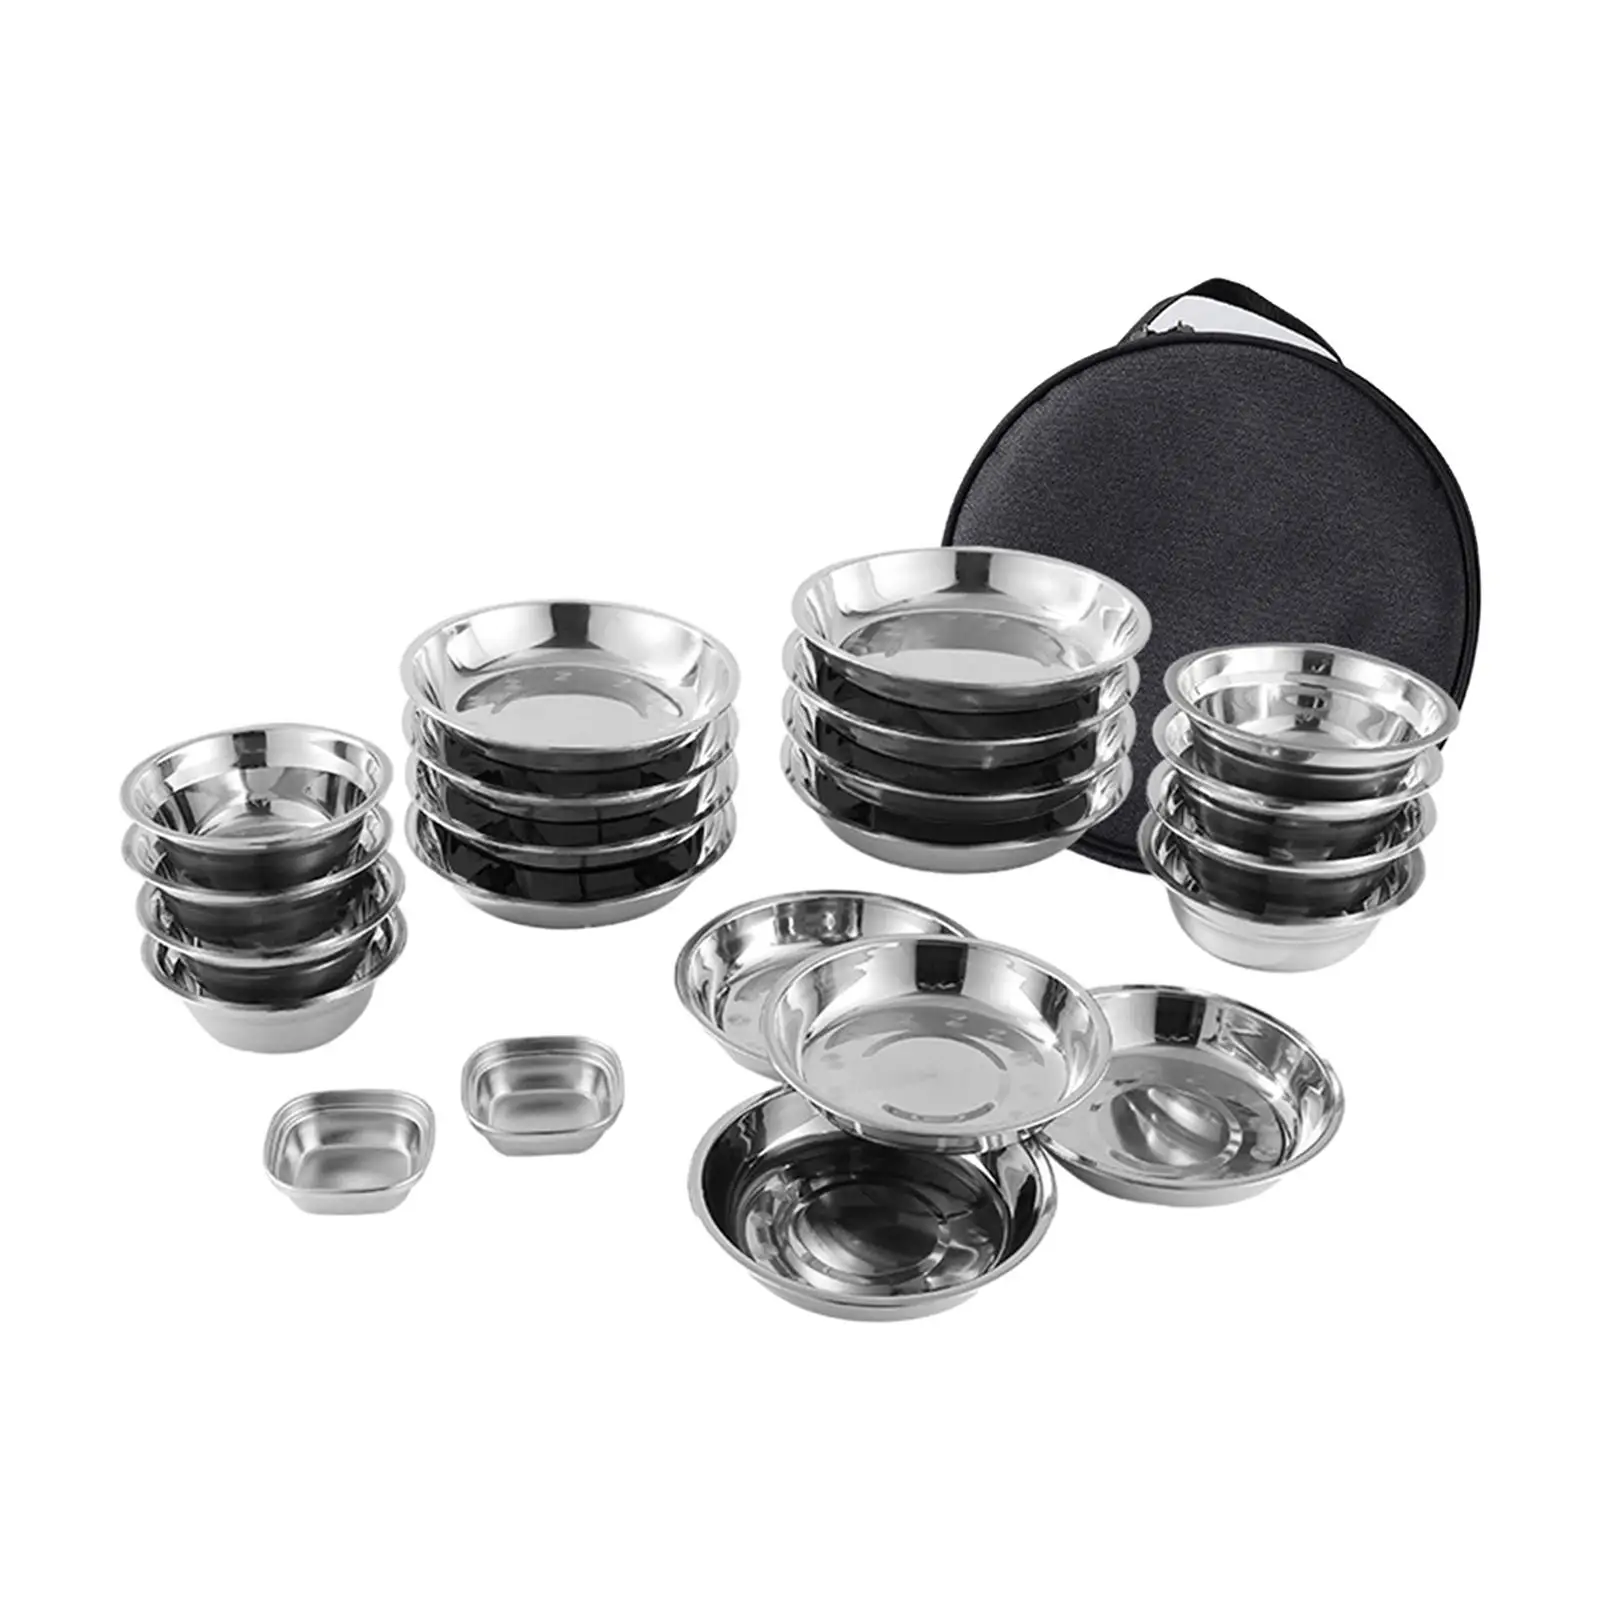 Stainless Steel Plates and Bowls Camping Set Camping Utensils Lightweight Dinner